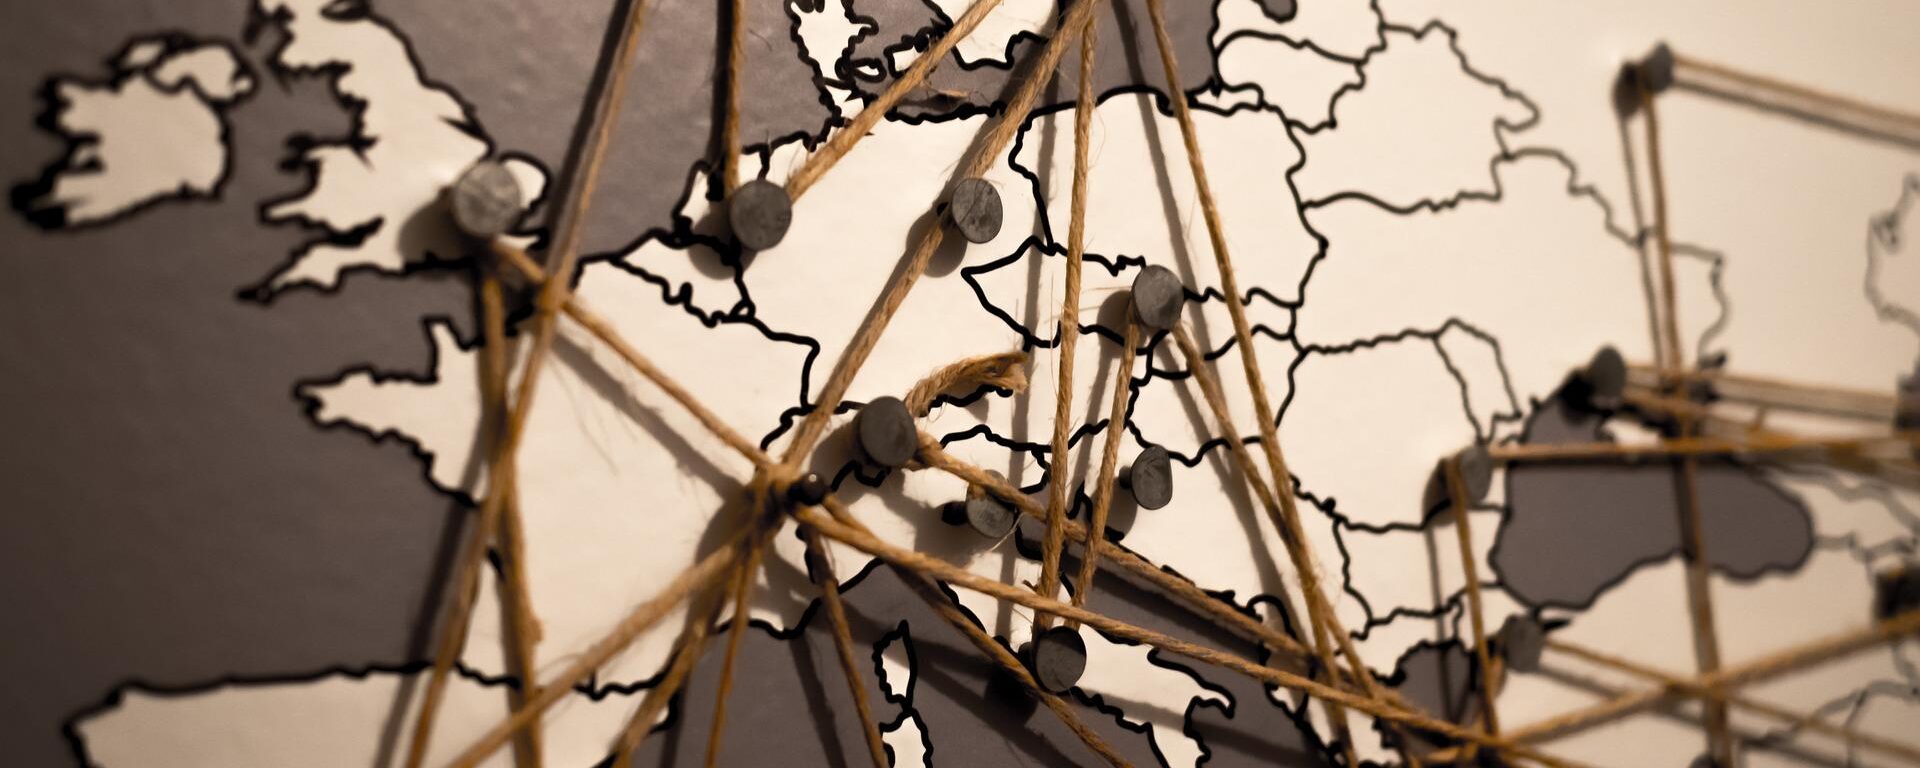 A map of Europe with pins and string